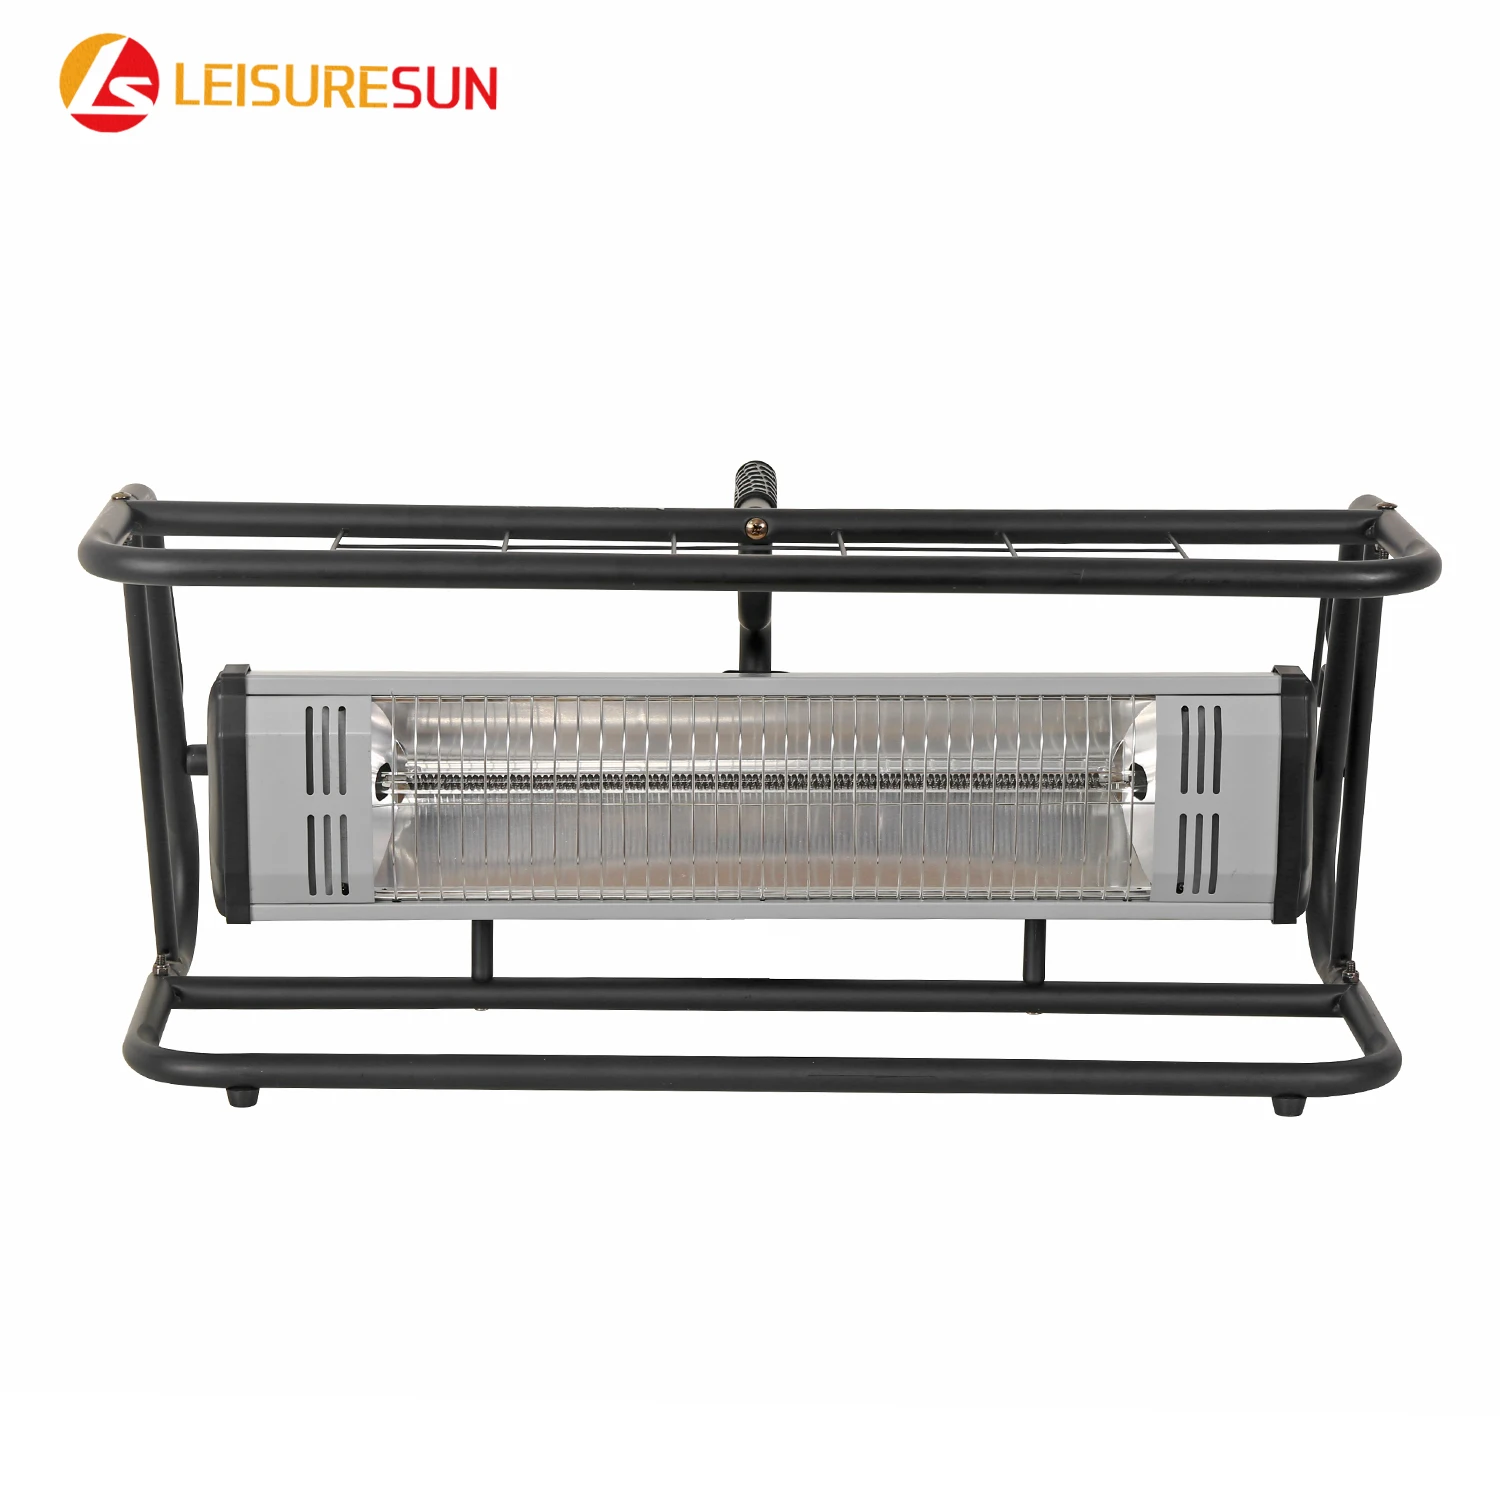 1500W Workspace Radiant infrared heater with portable roll cage